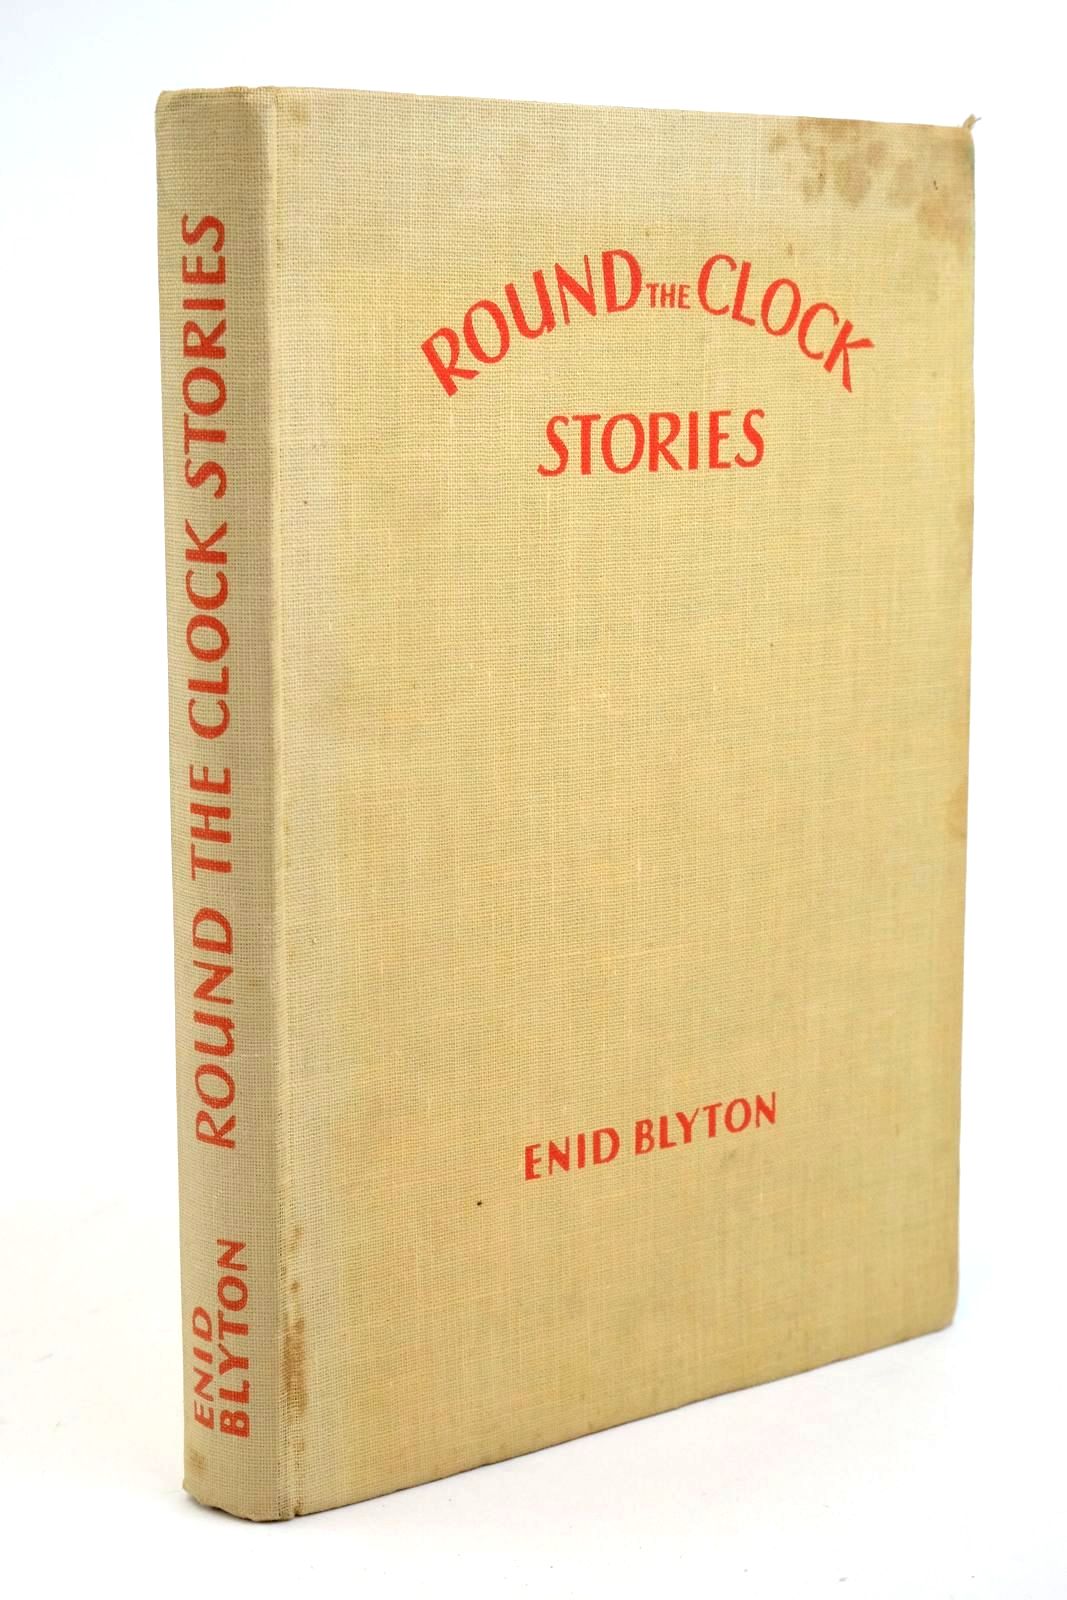 Photo of ROUND THE CLOCK STORIES- Stock Number: 1321808